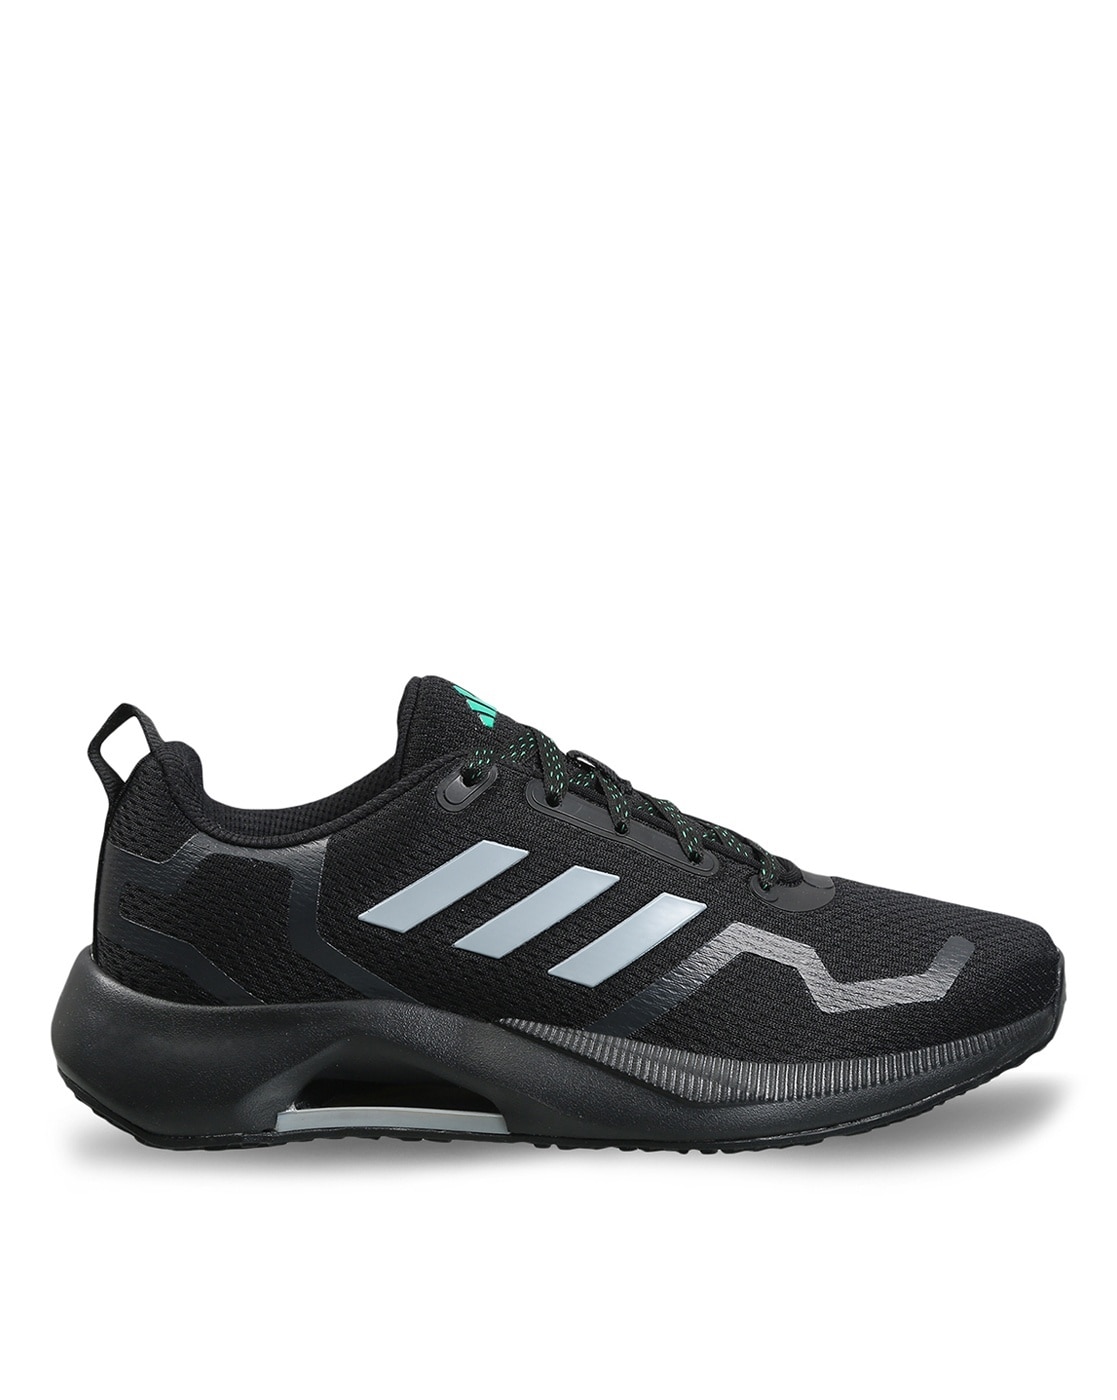 14 Best adidas Running Shoes of 2023